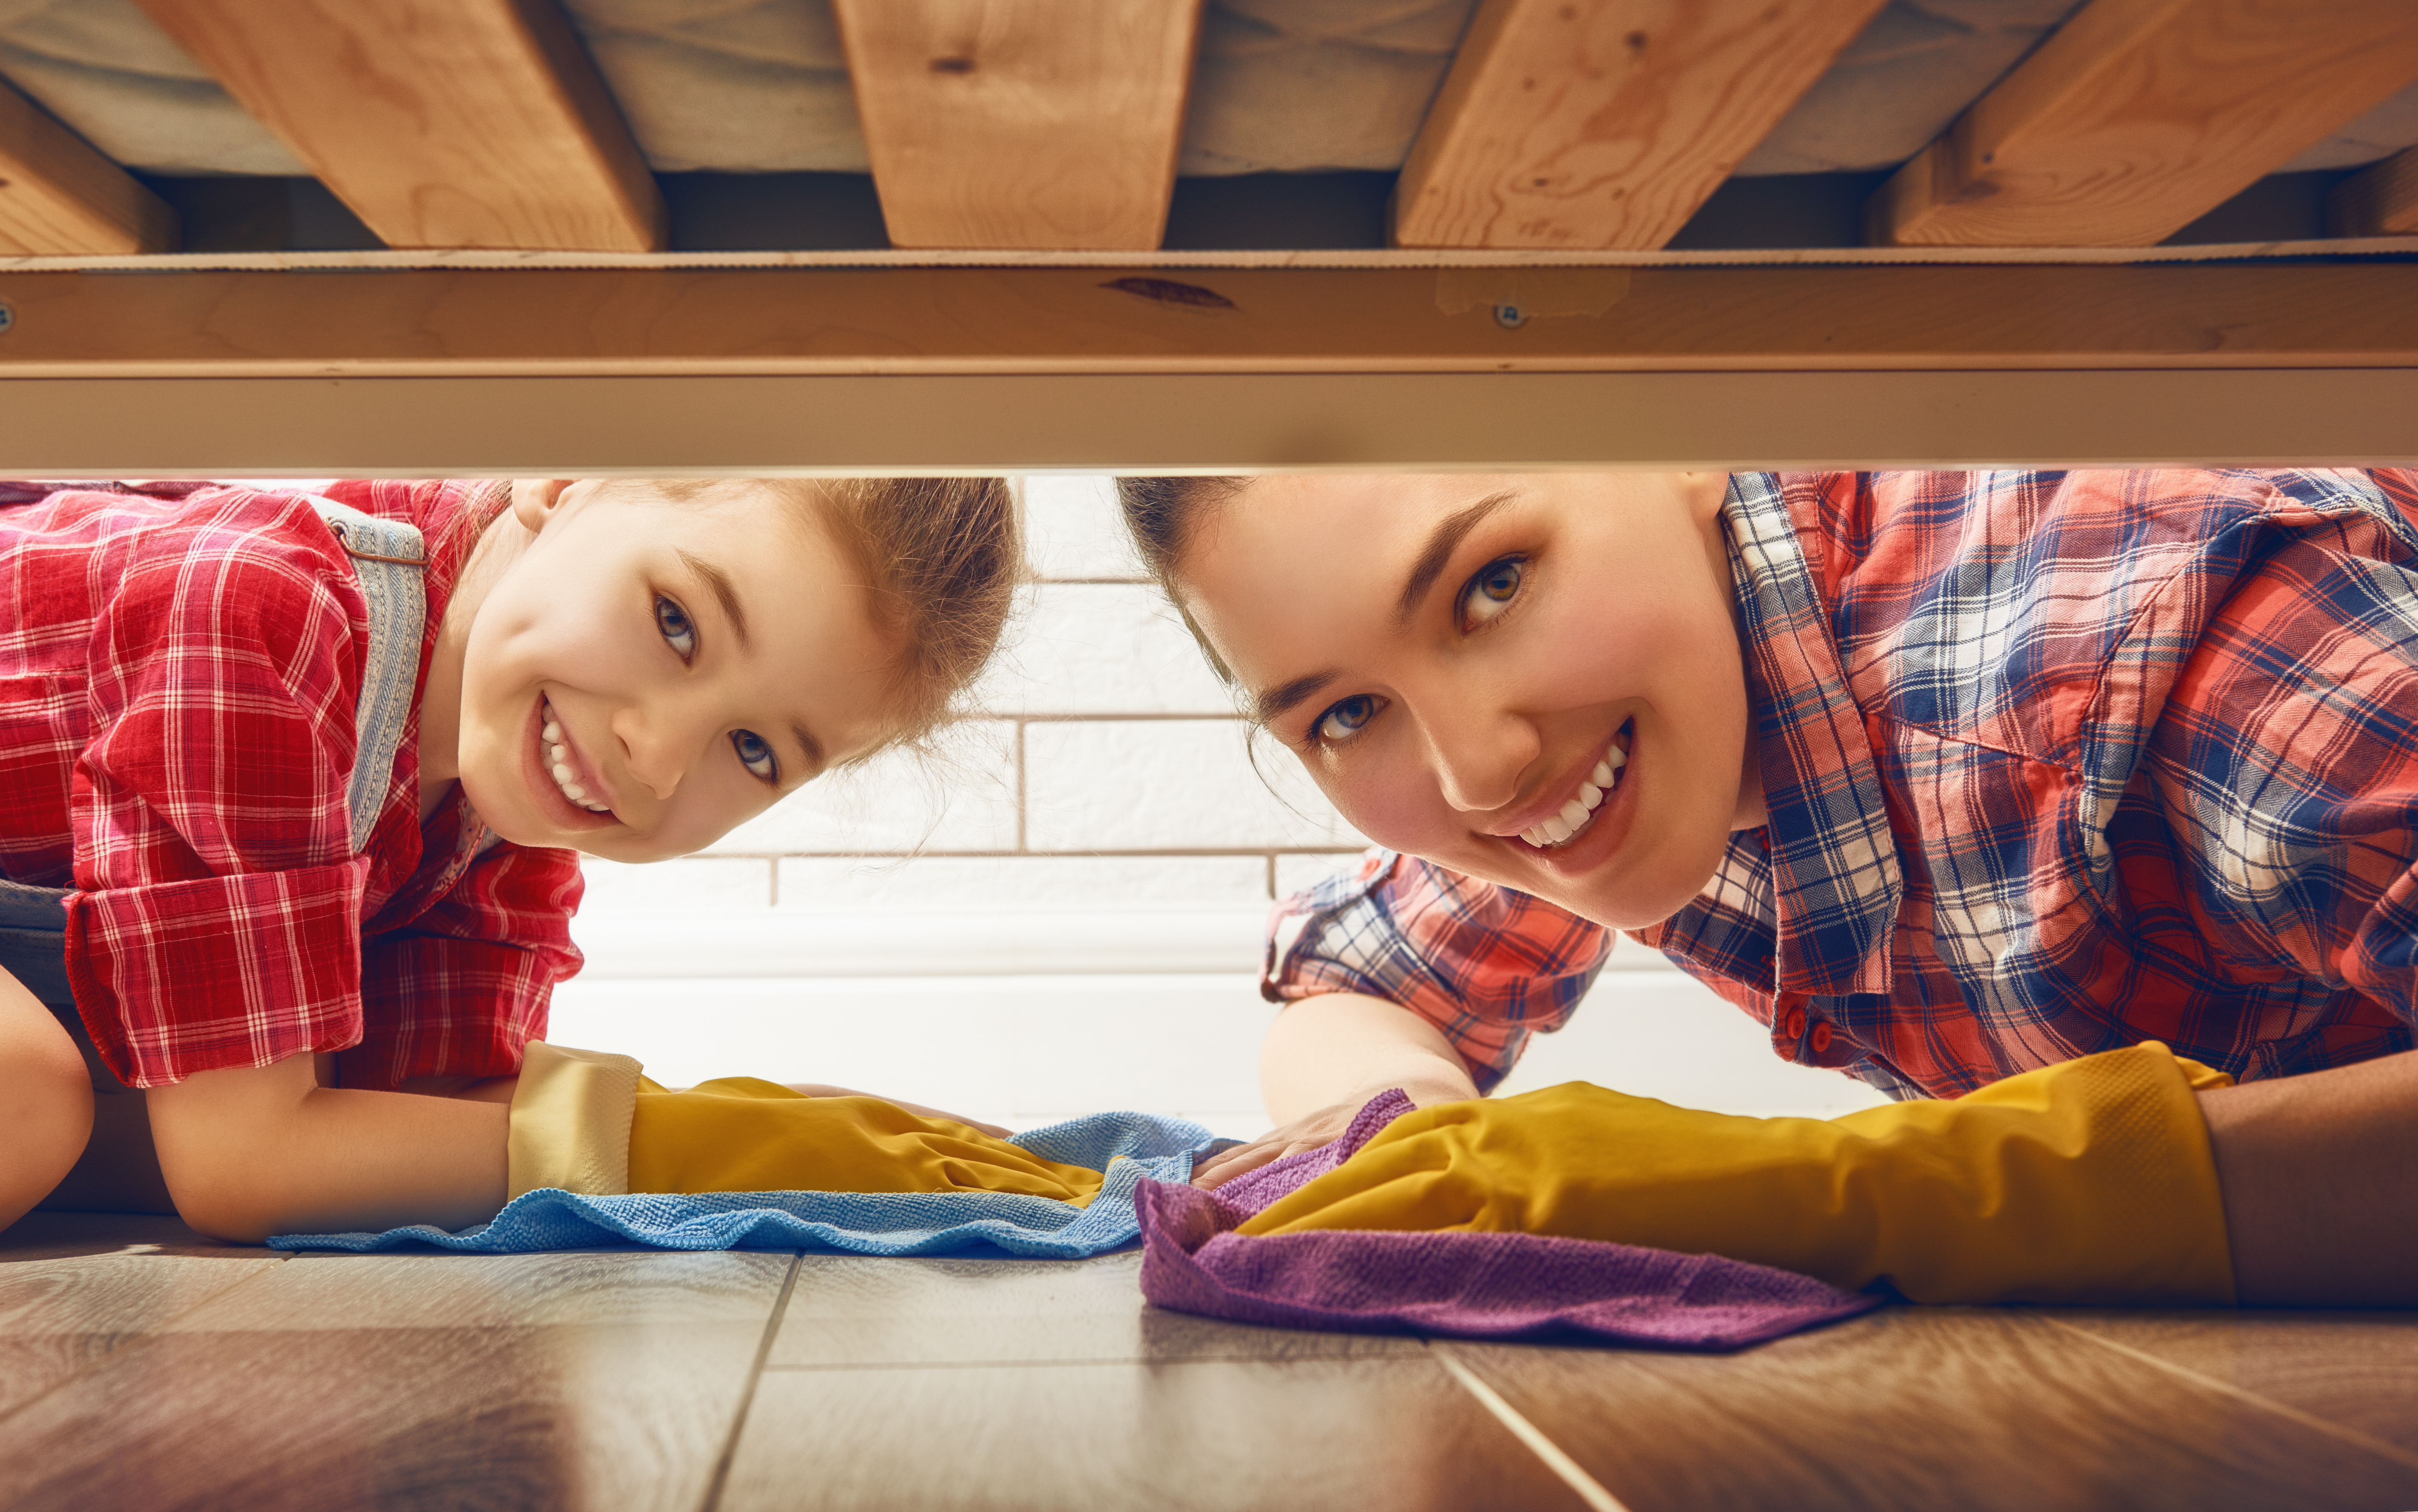 Image of woman and child peeking under a bed while cleaning